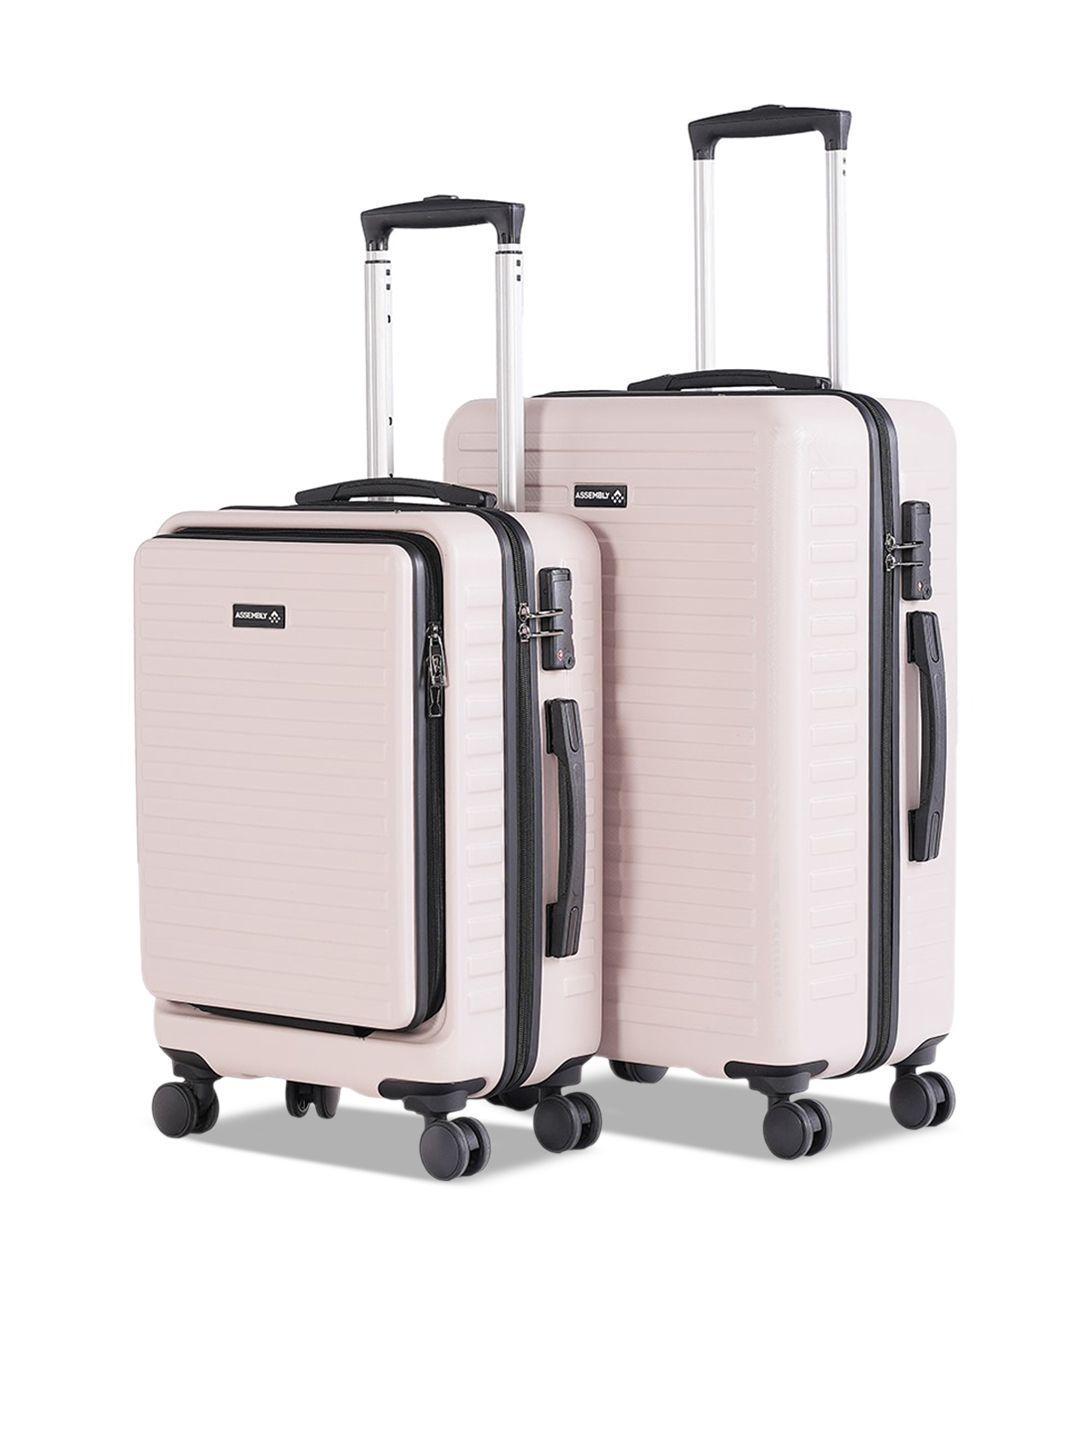 assembly set of 2 textured hard-sided trolley suitcase